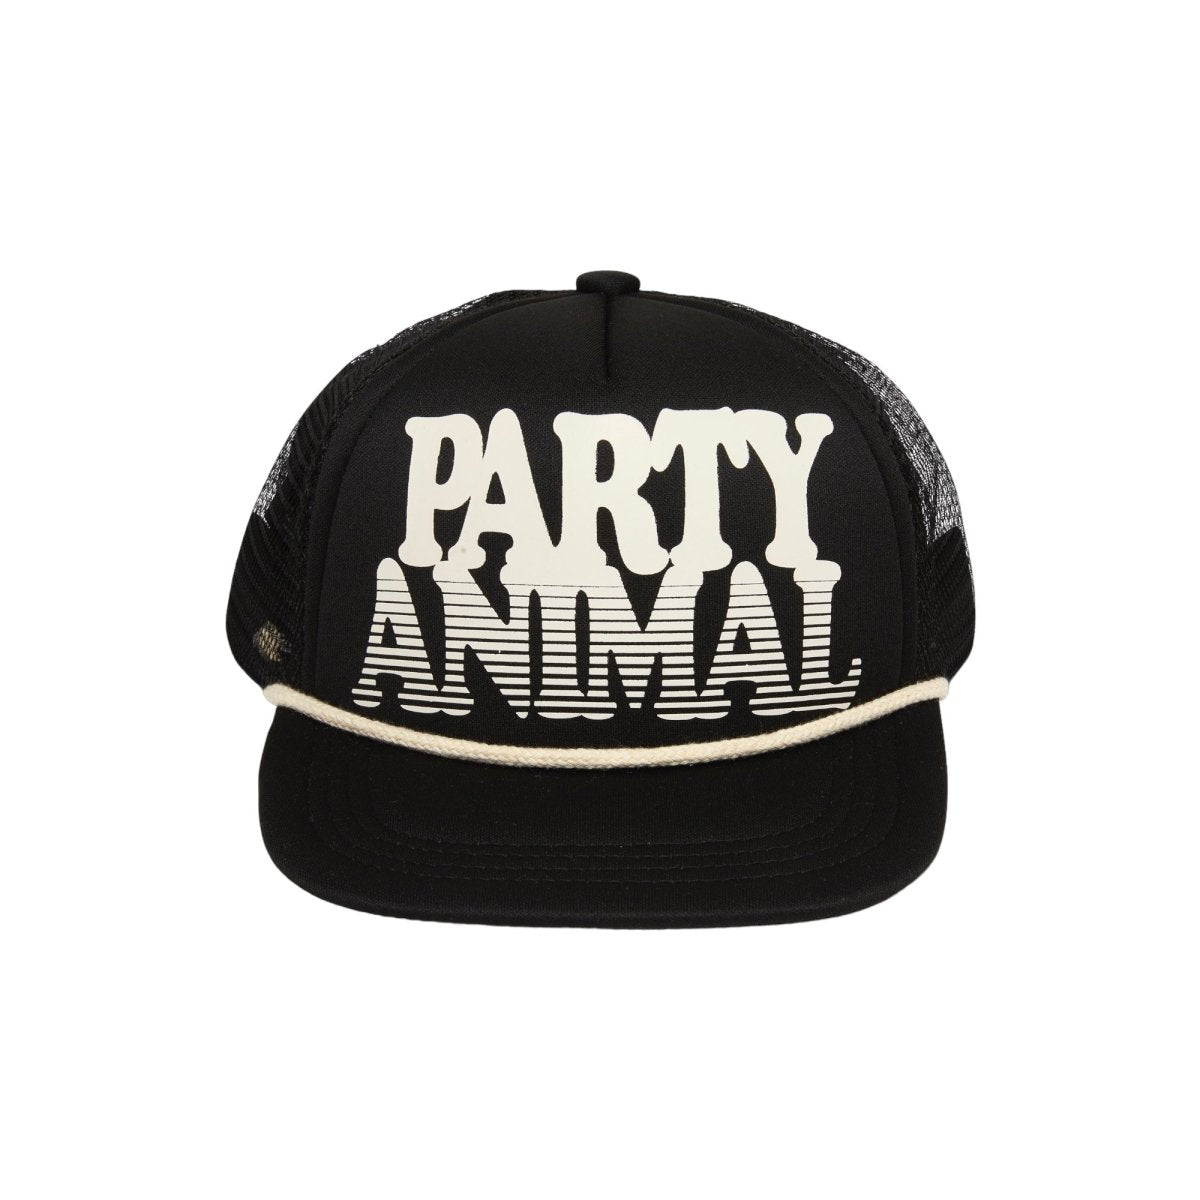 PARTY ANIMALS TRUCKER HAT - TINY WHALES